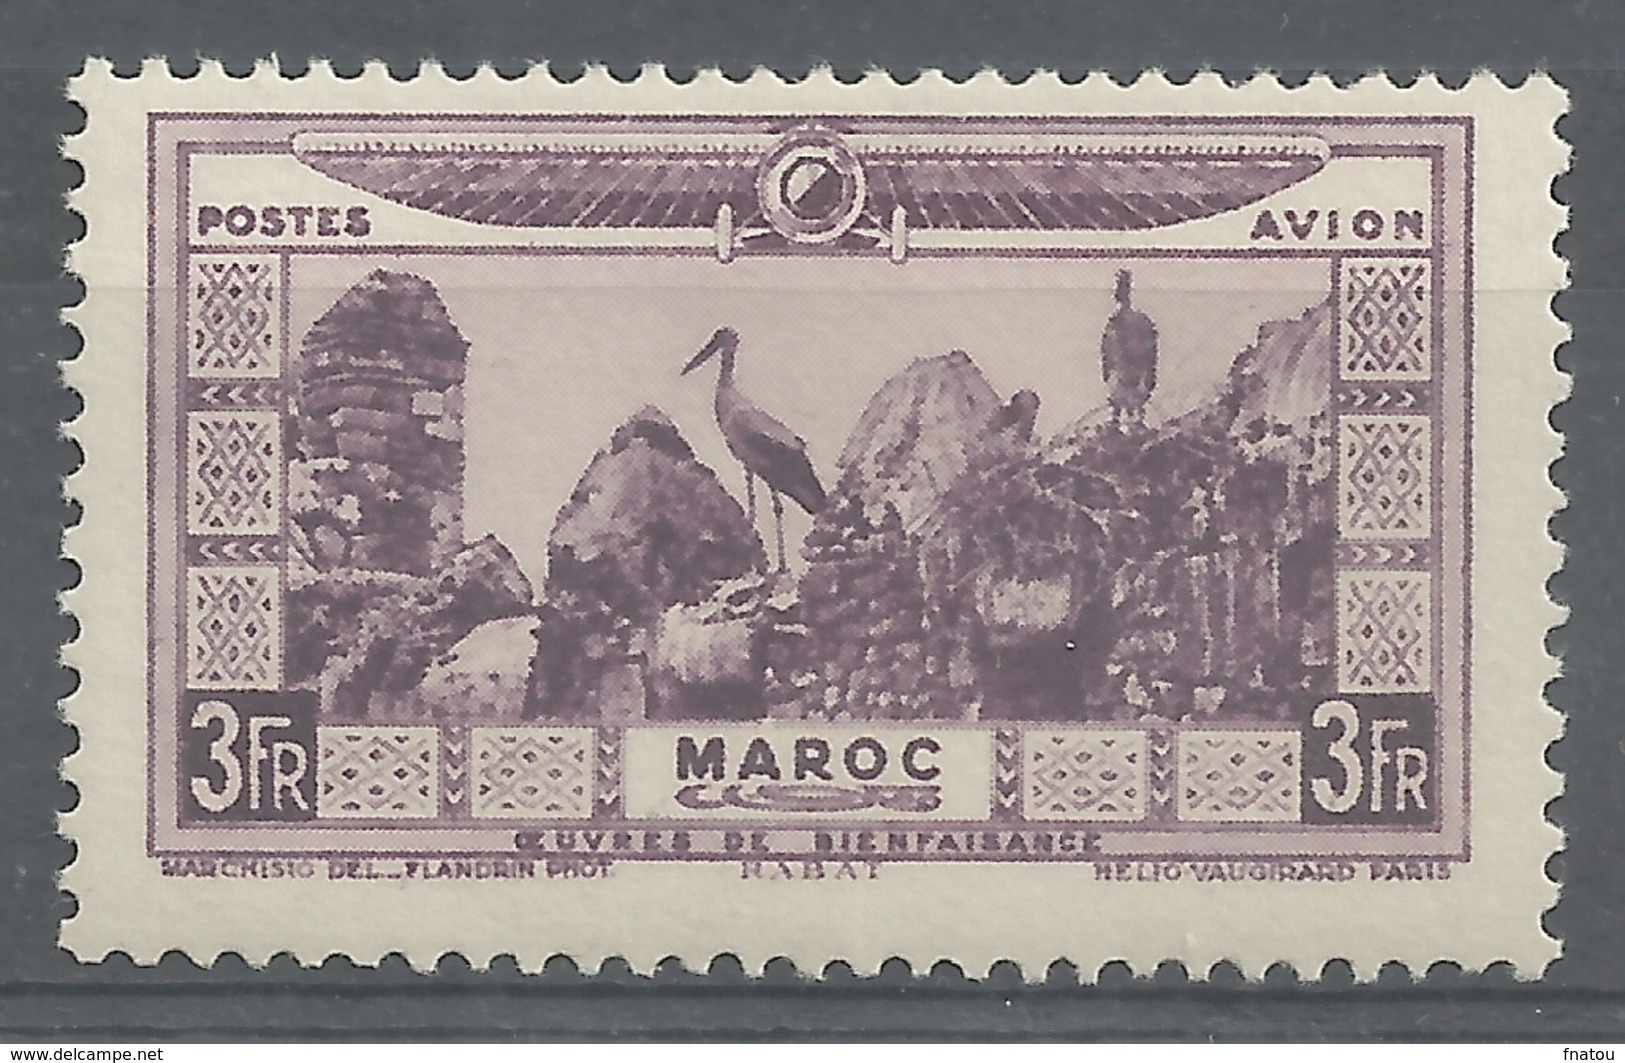 French Morocco, Rabat, 3f., 1928, MH VF, Airmail - Airmail